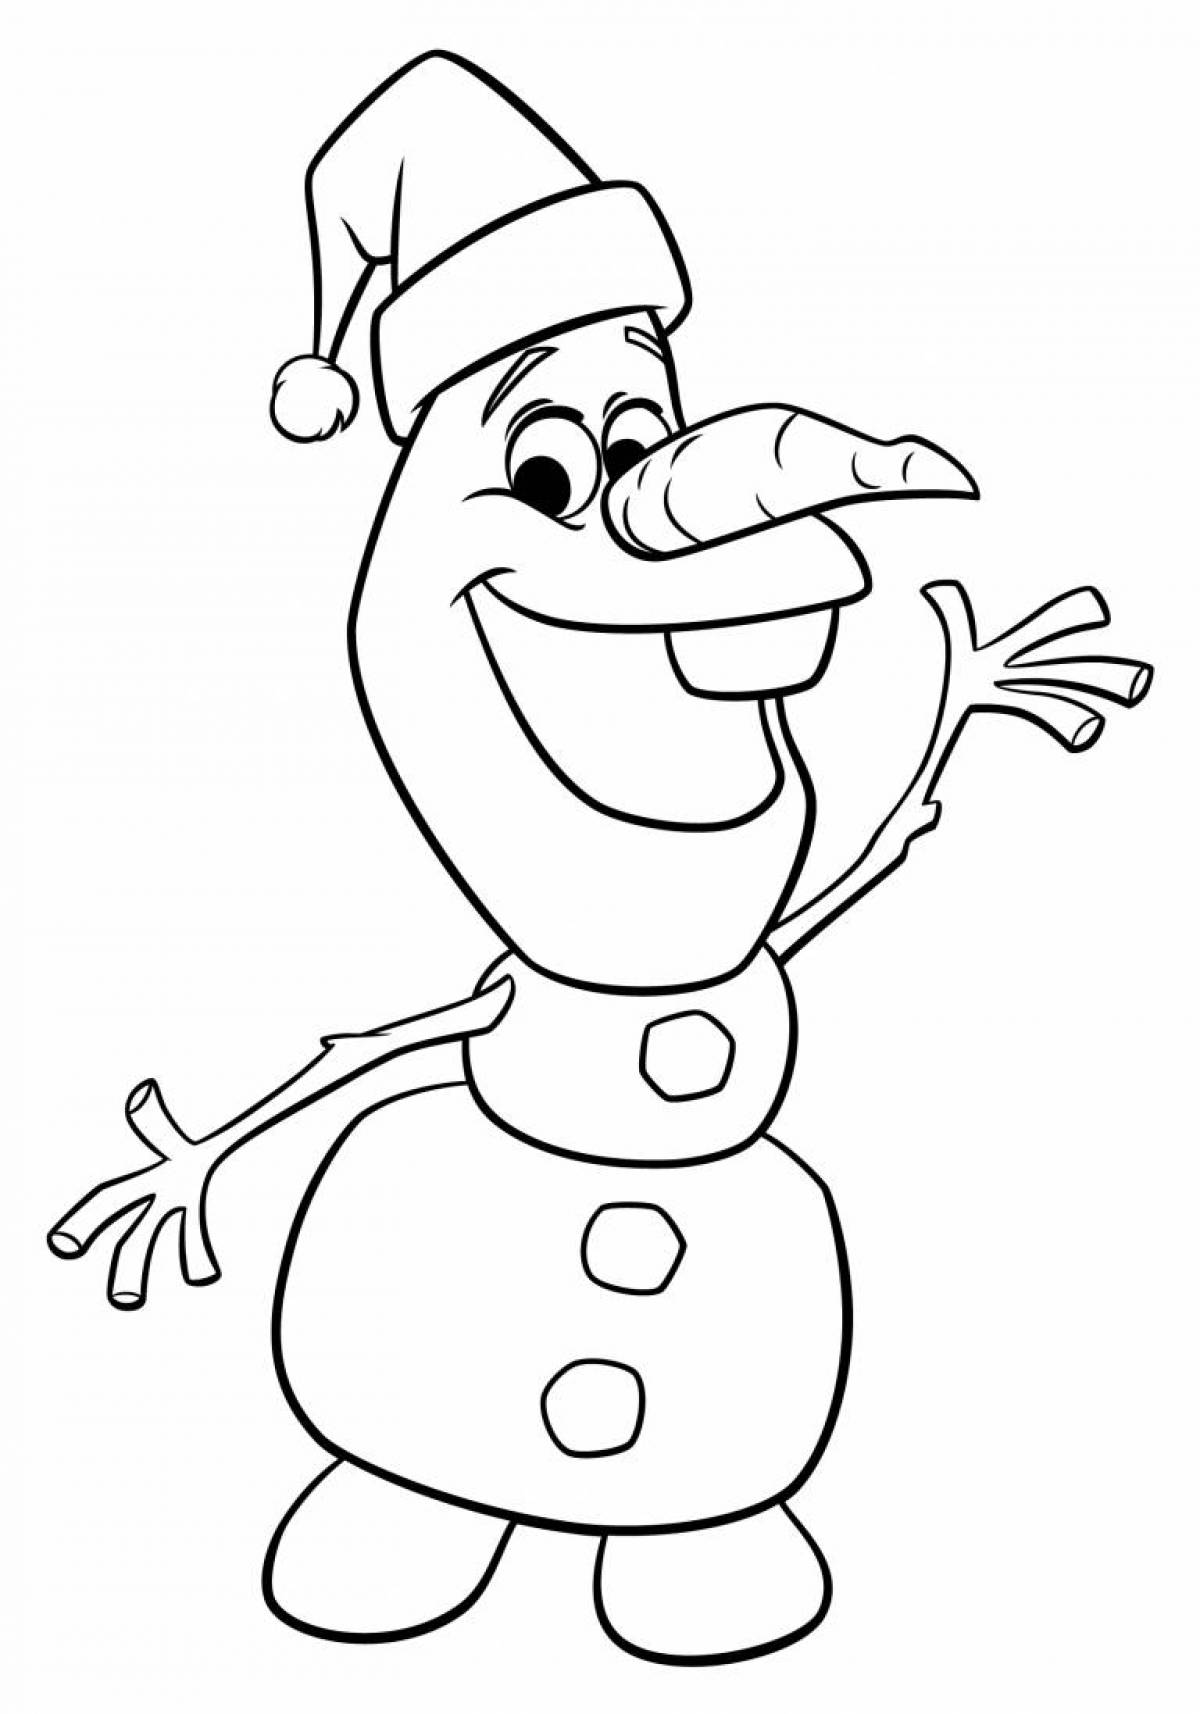 Olaf glowing coloring book